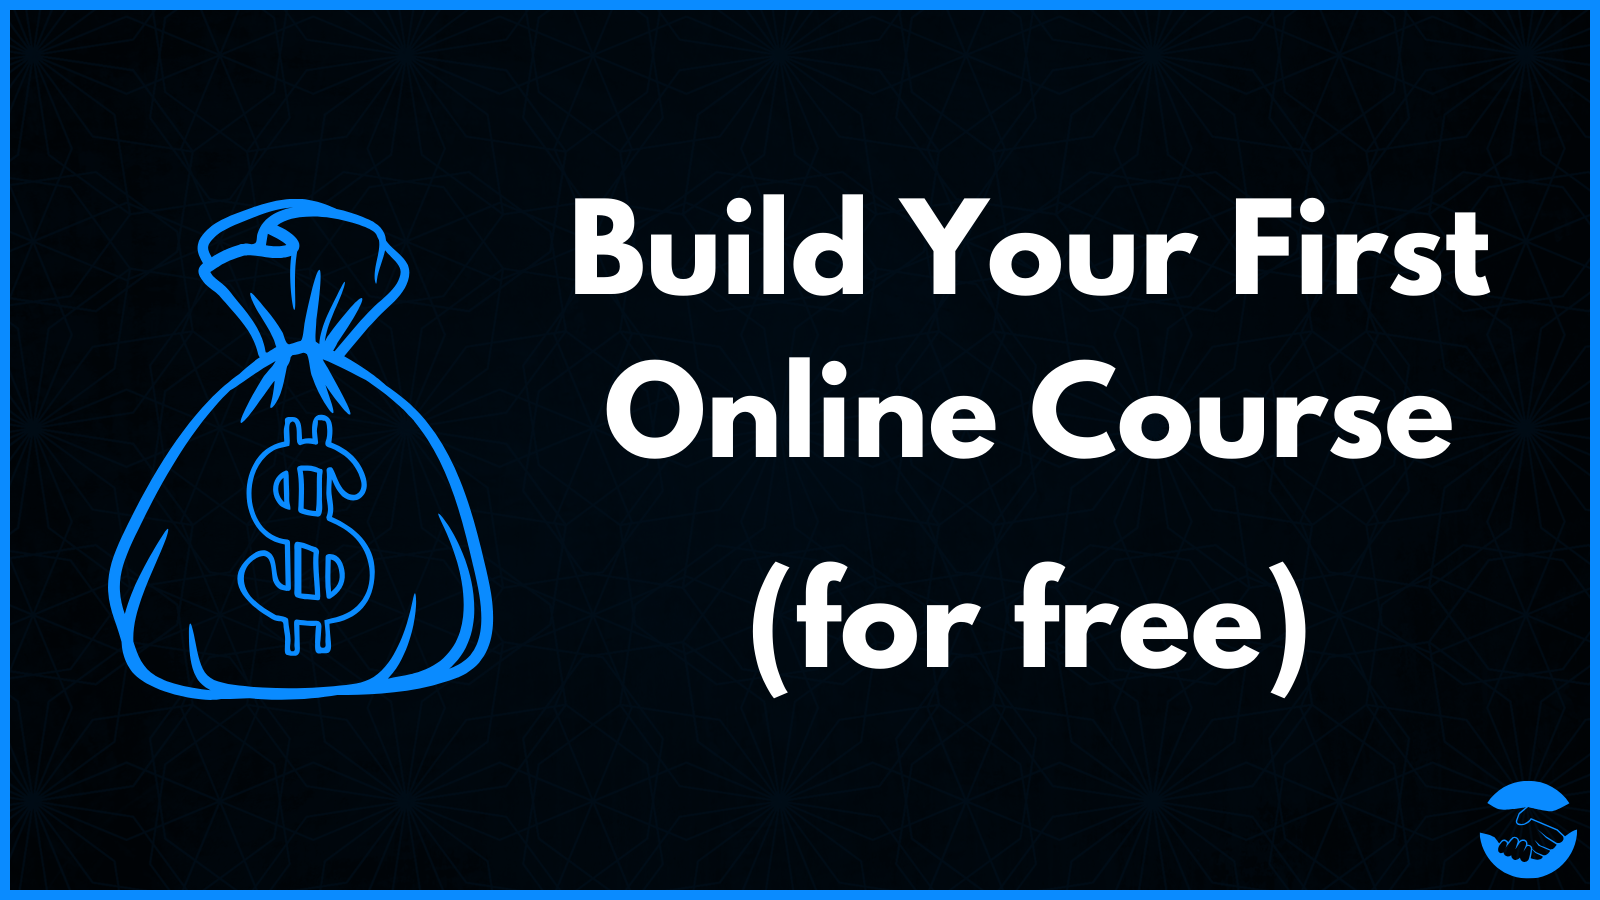 A Step-By-Step Guide to Building Your First Online Course for $0 (I Made $43K in 30 Days with This Method)